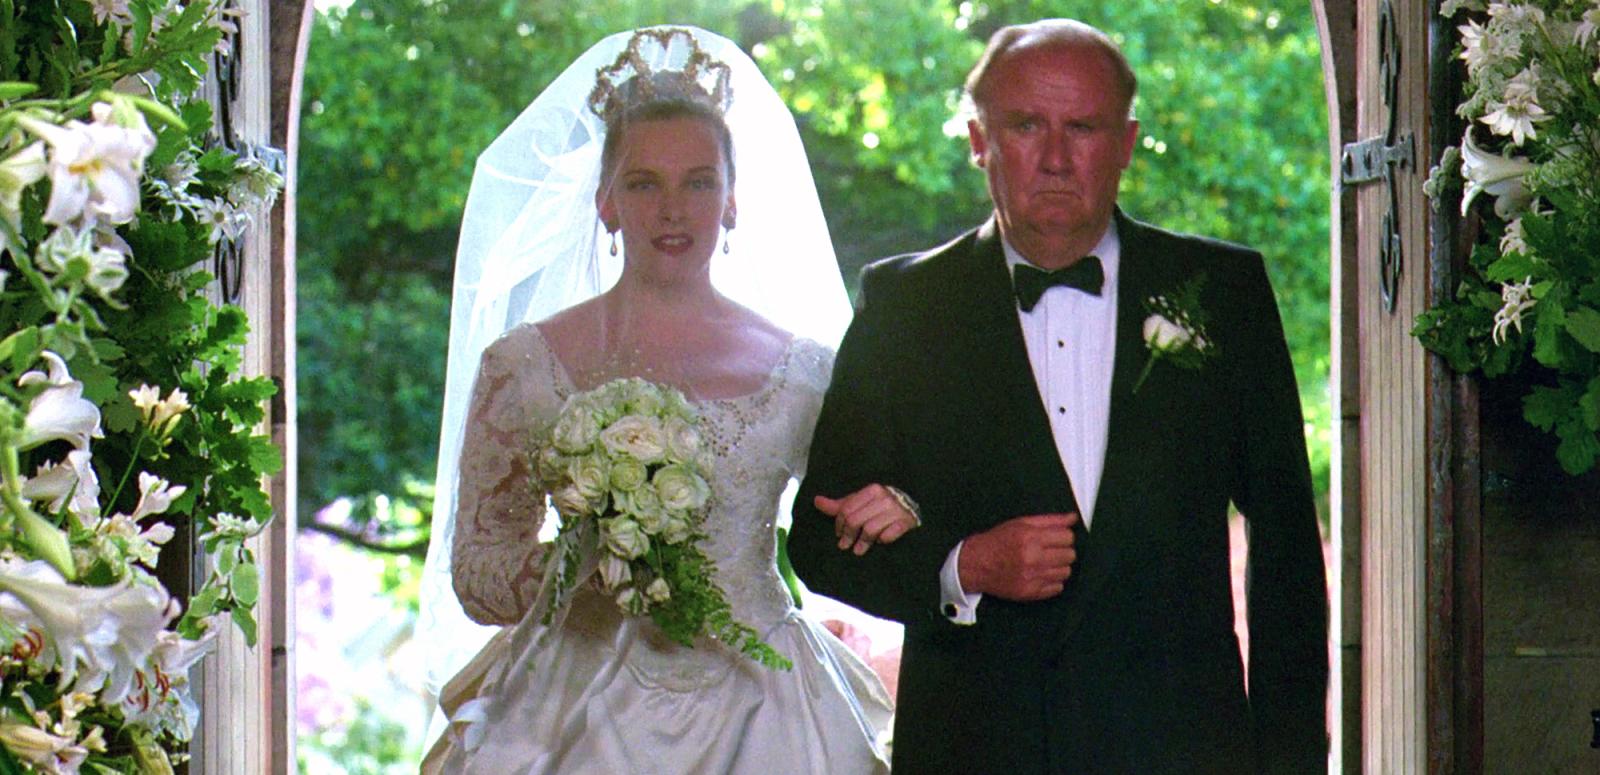 Toni Collette (Muriel) and her father Bill (Bill Hunter) about to walk down the aisle in Muriel's Wedding